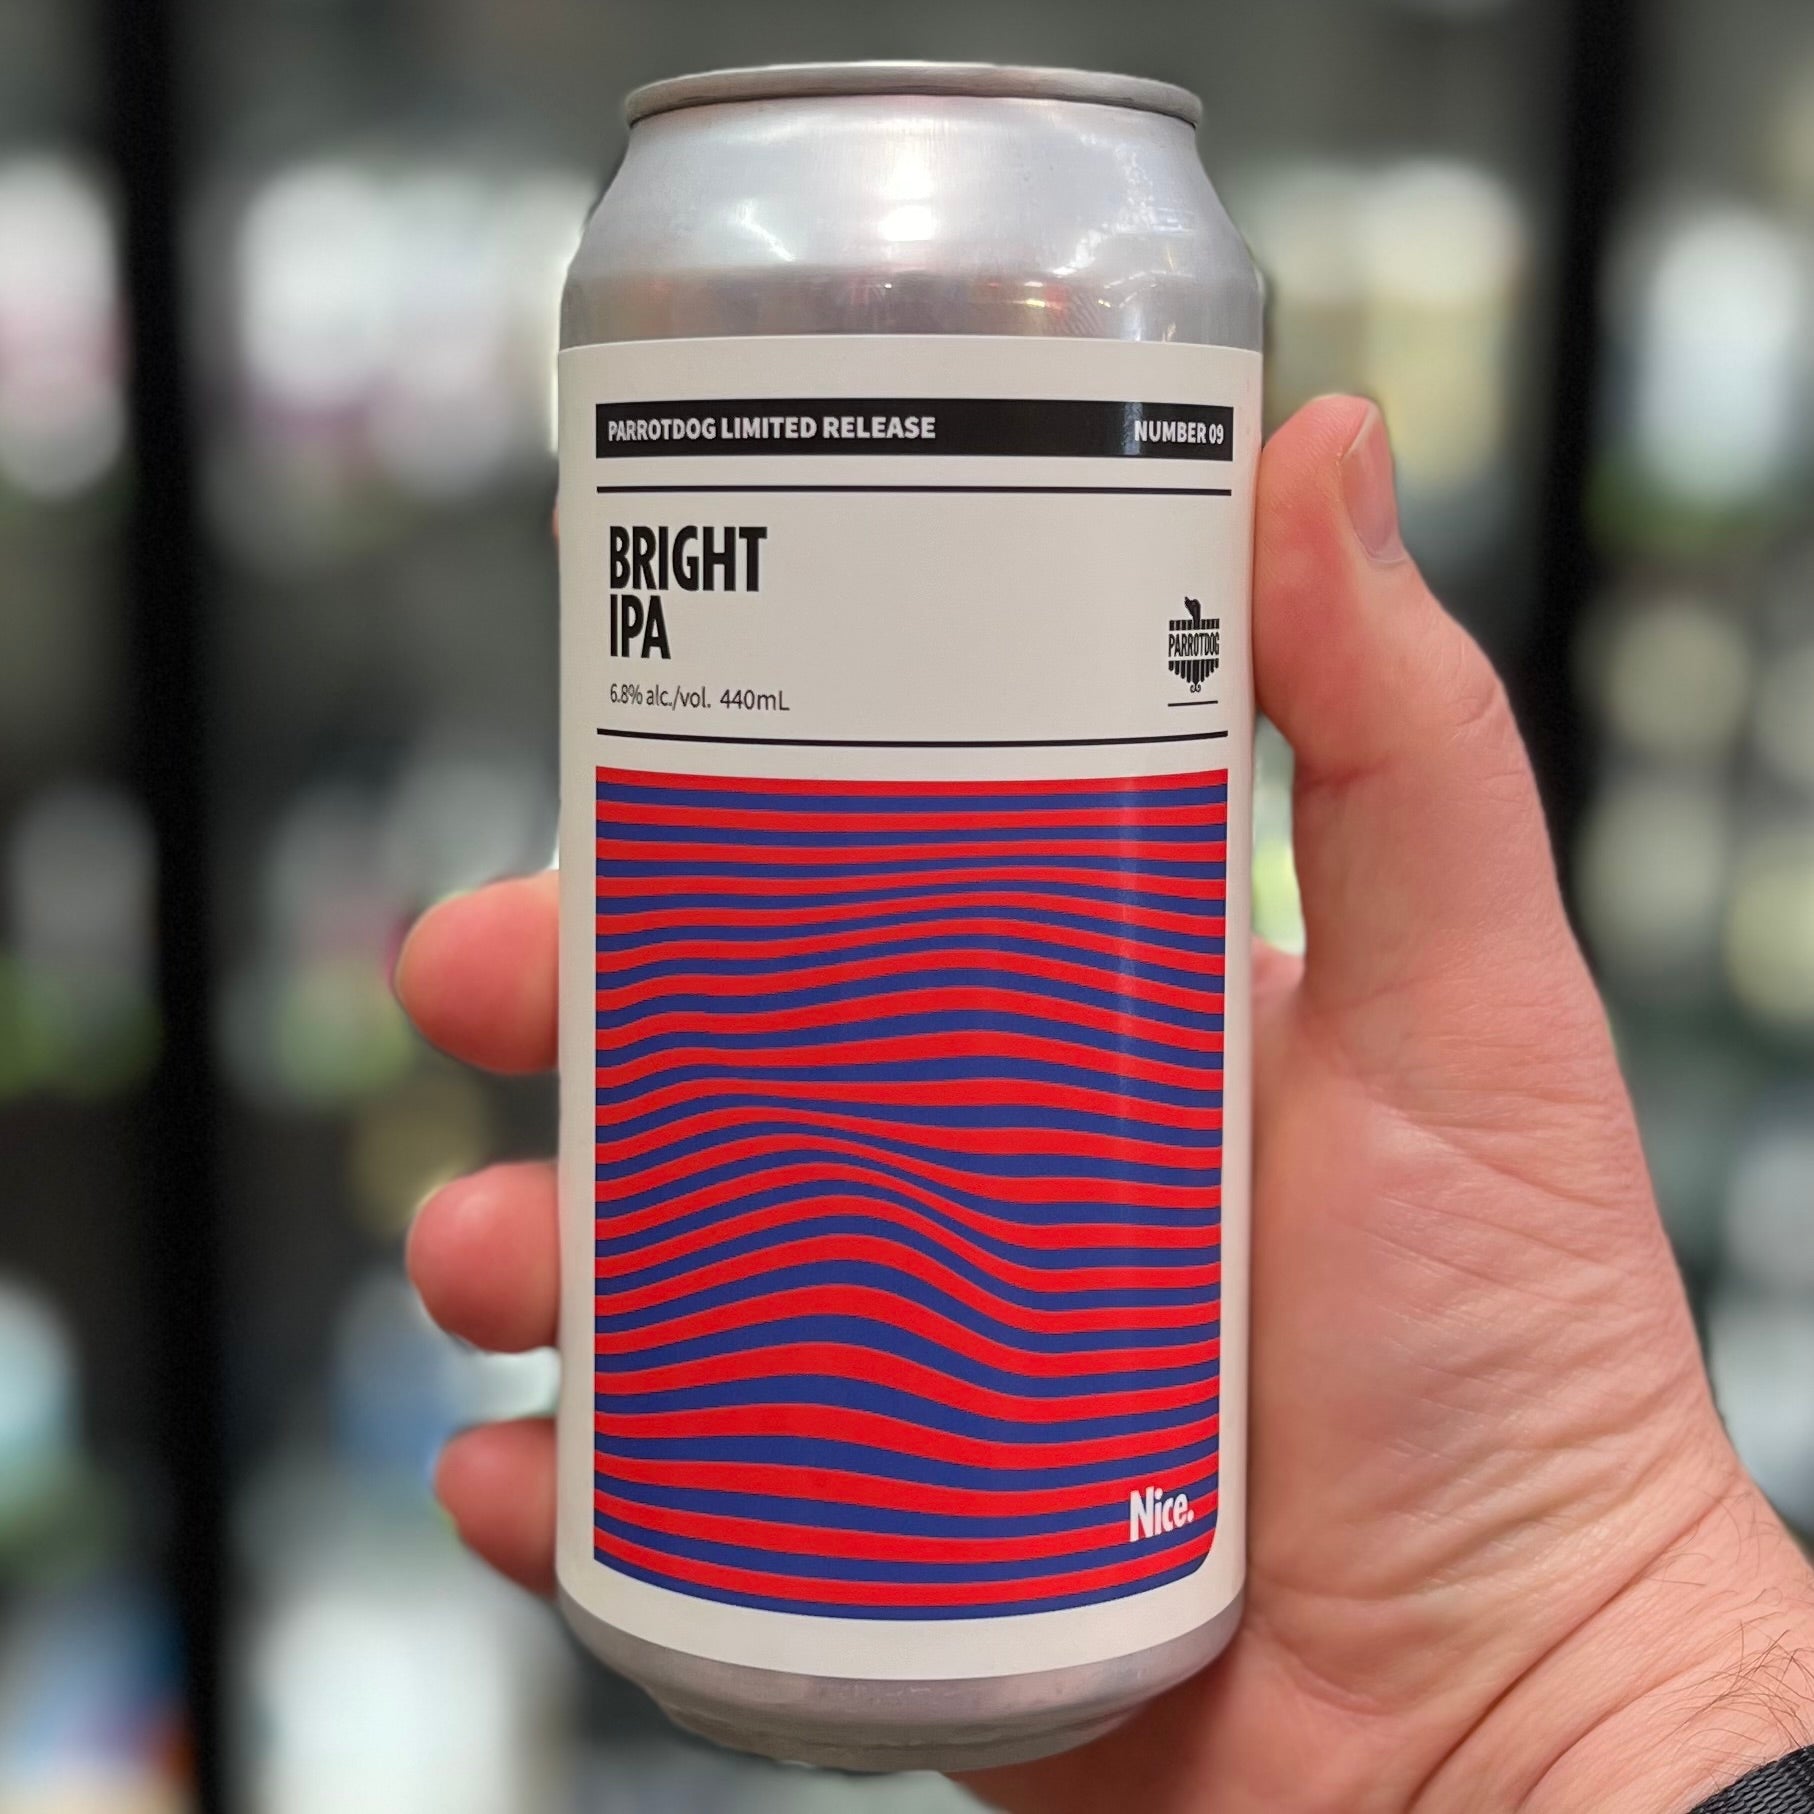 Limited Release Number 09 Bright IPA